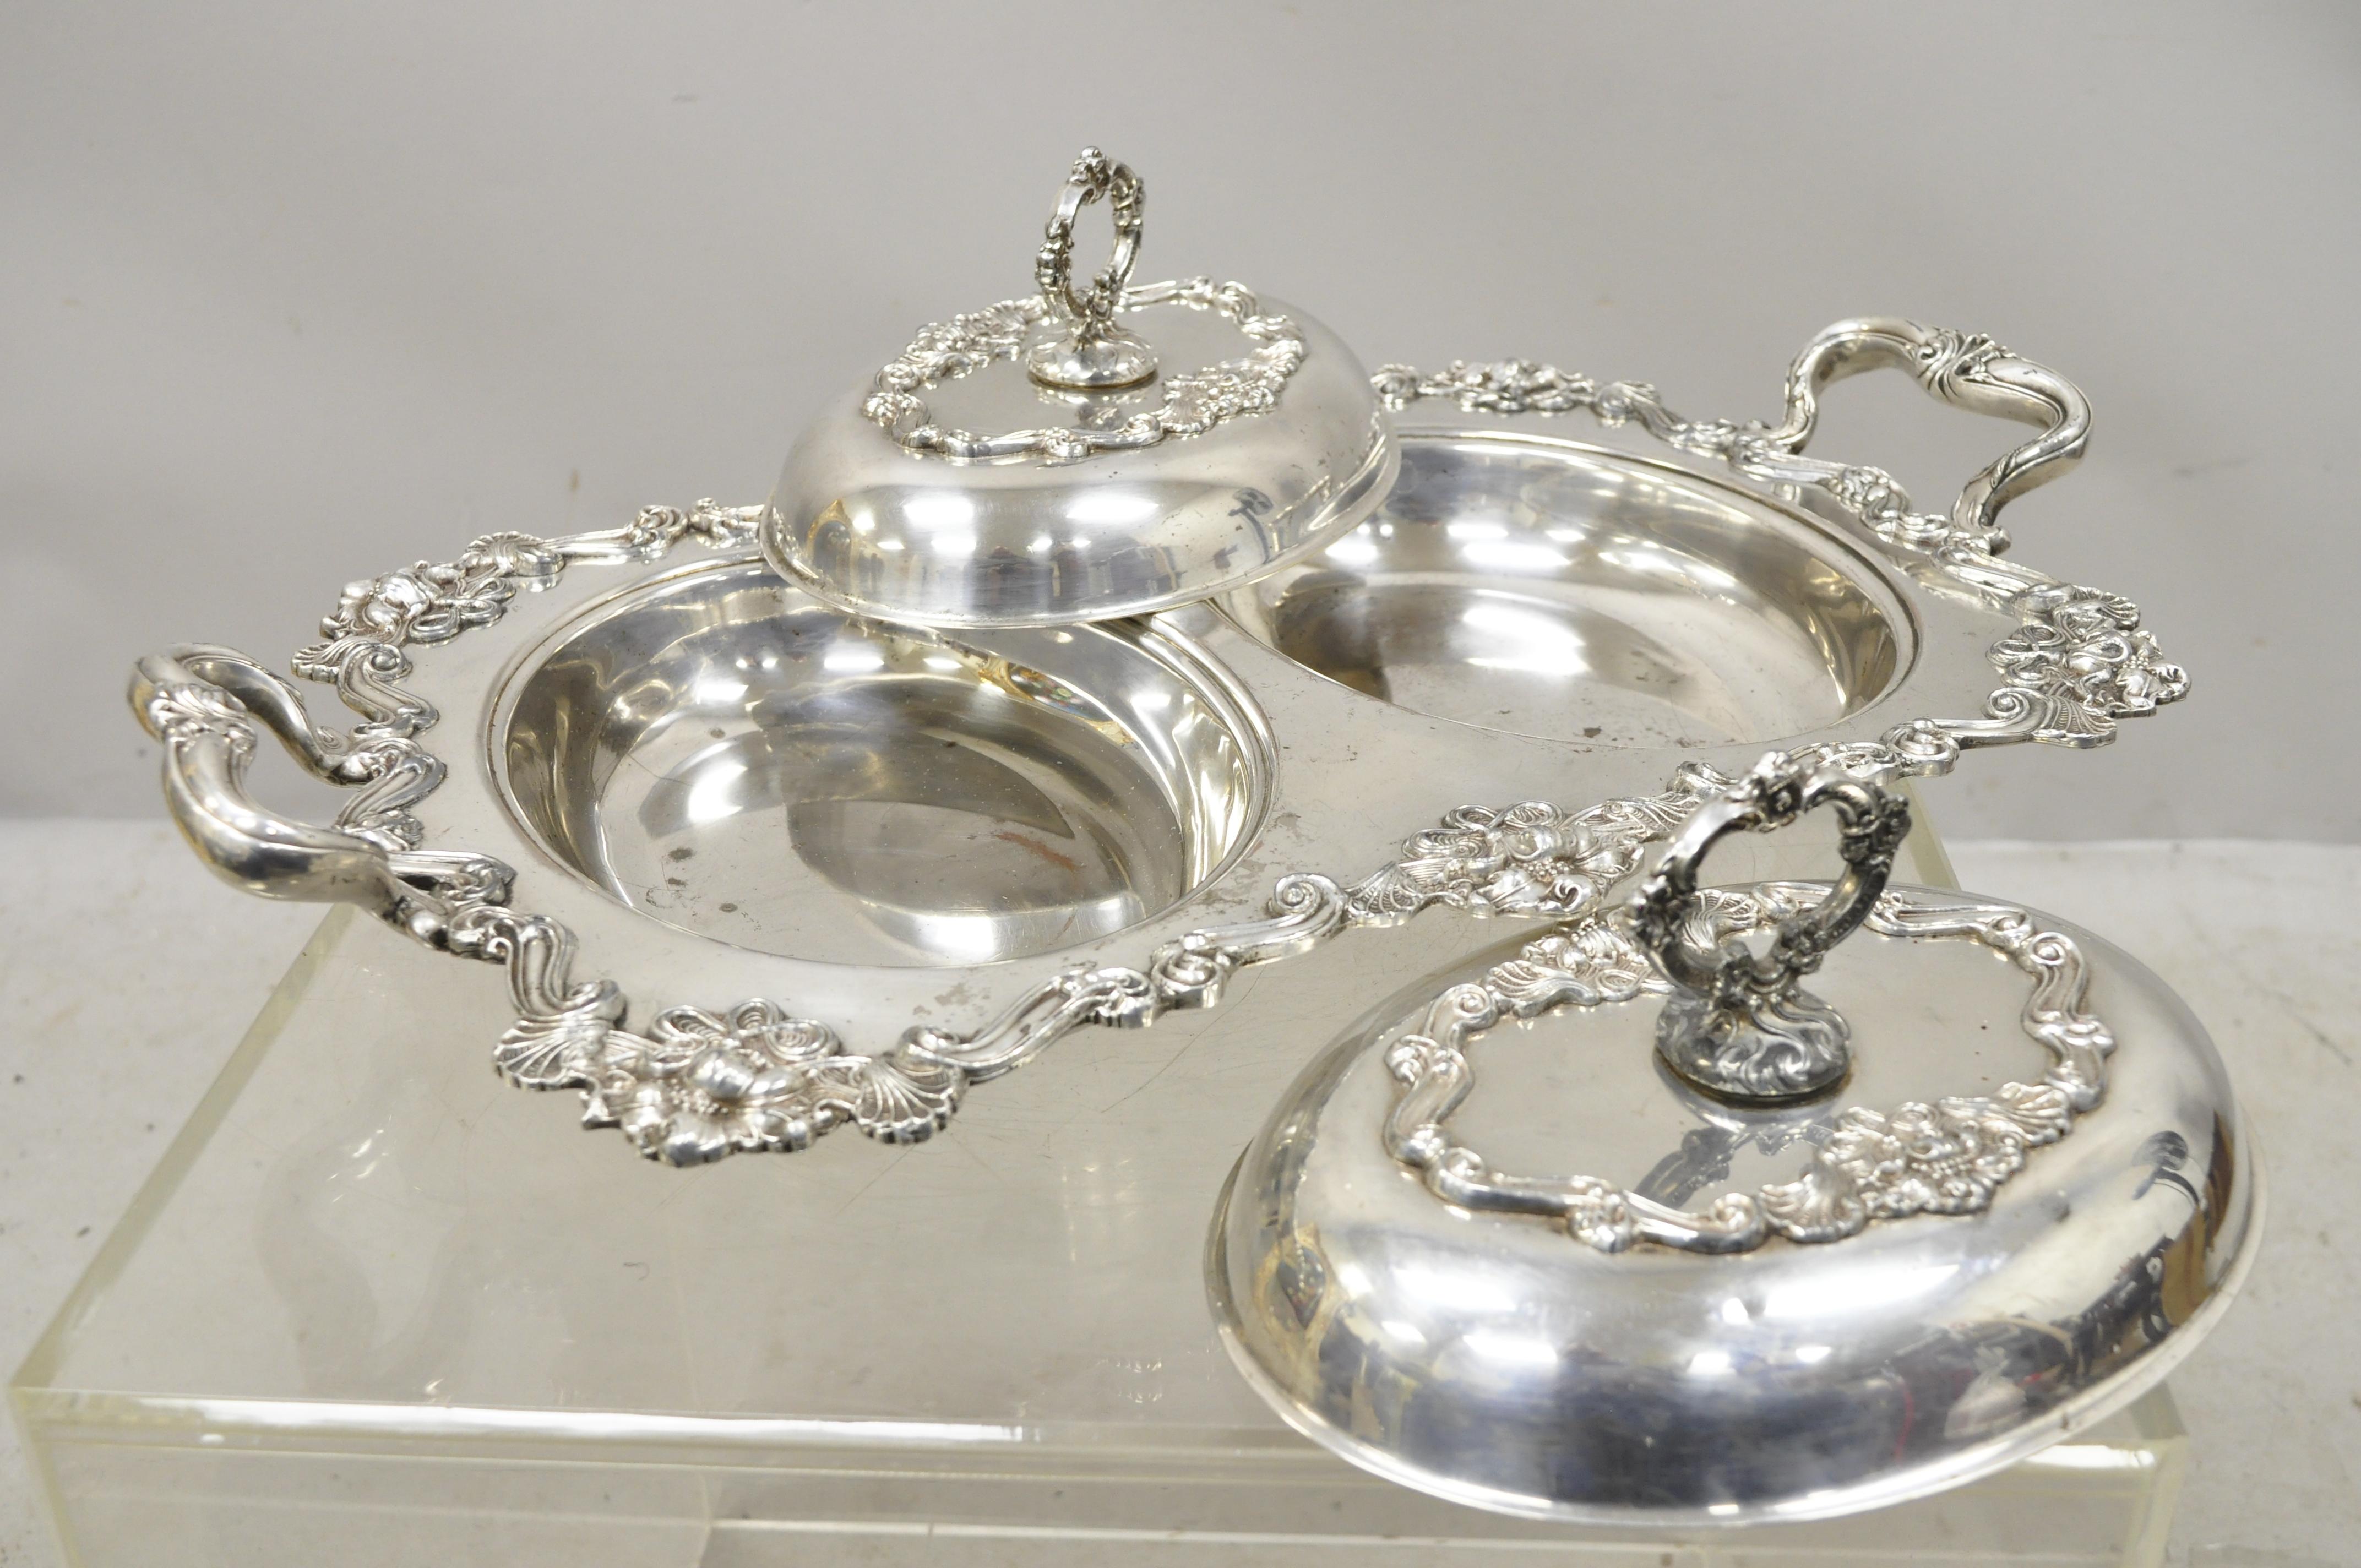 English French Art Nouveau Silver Plate Double Side Serving Dish Platter Tray with Lids